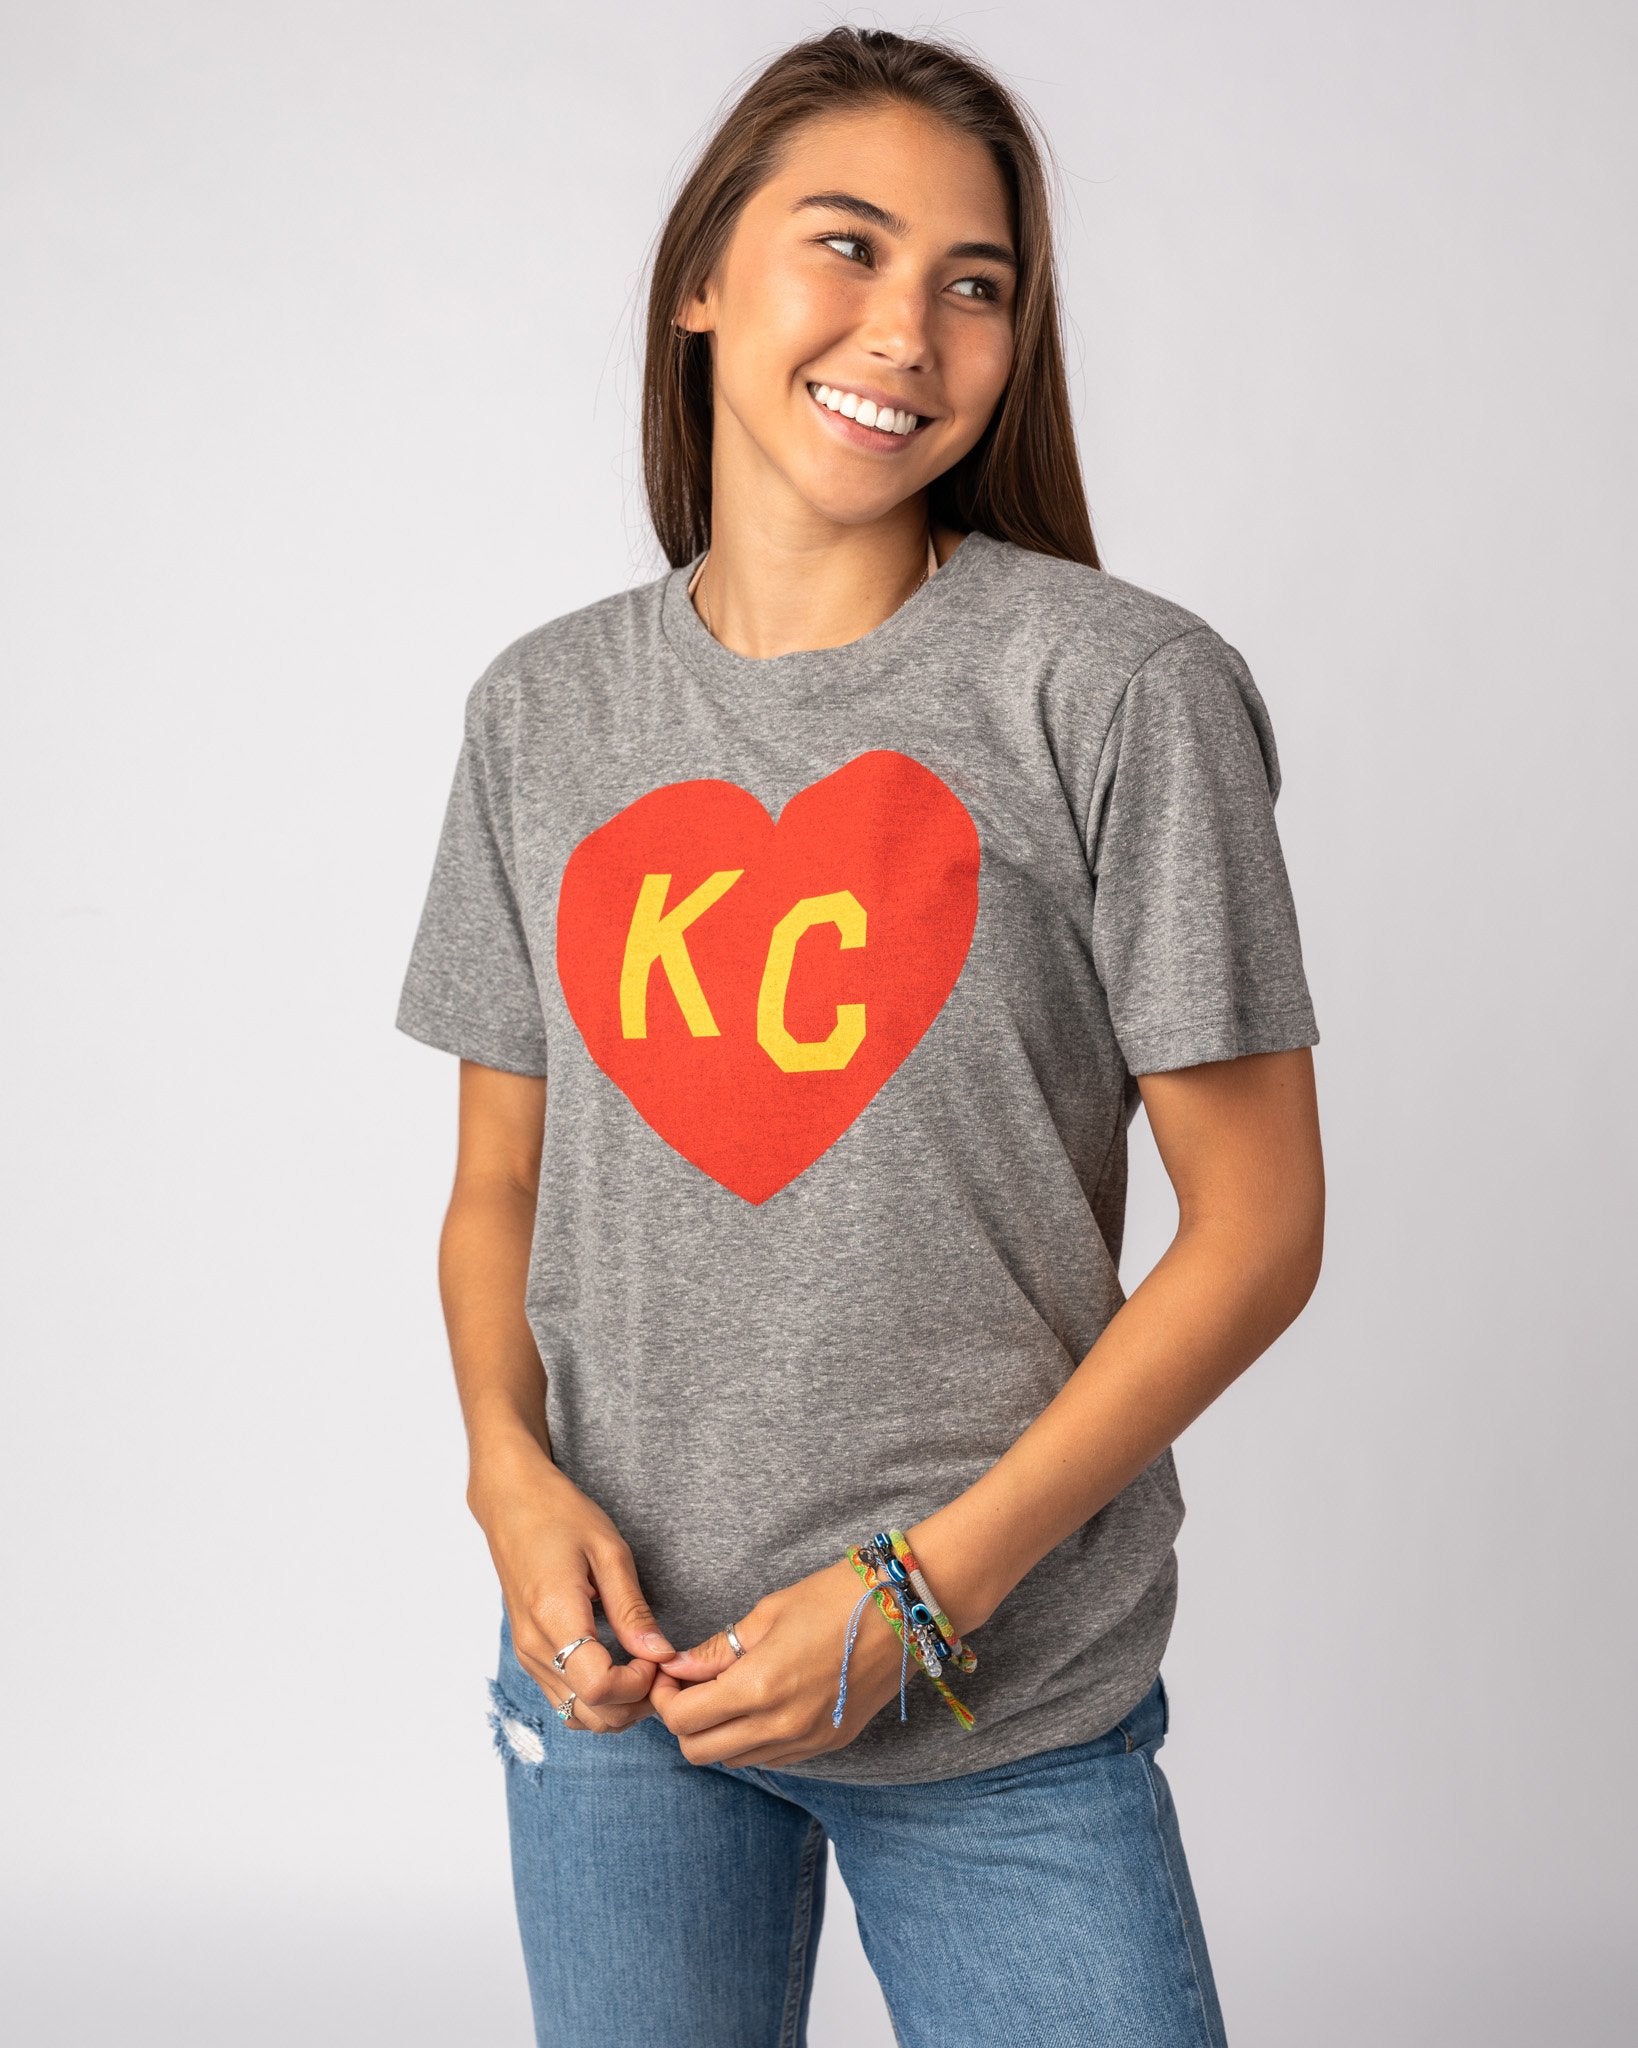 kc t shirts with heart